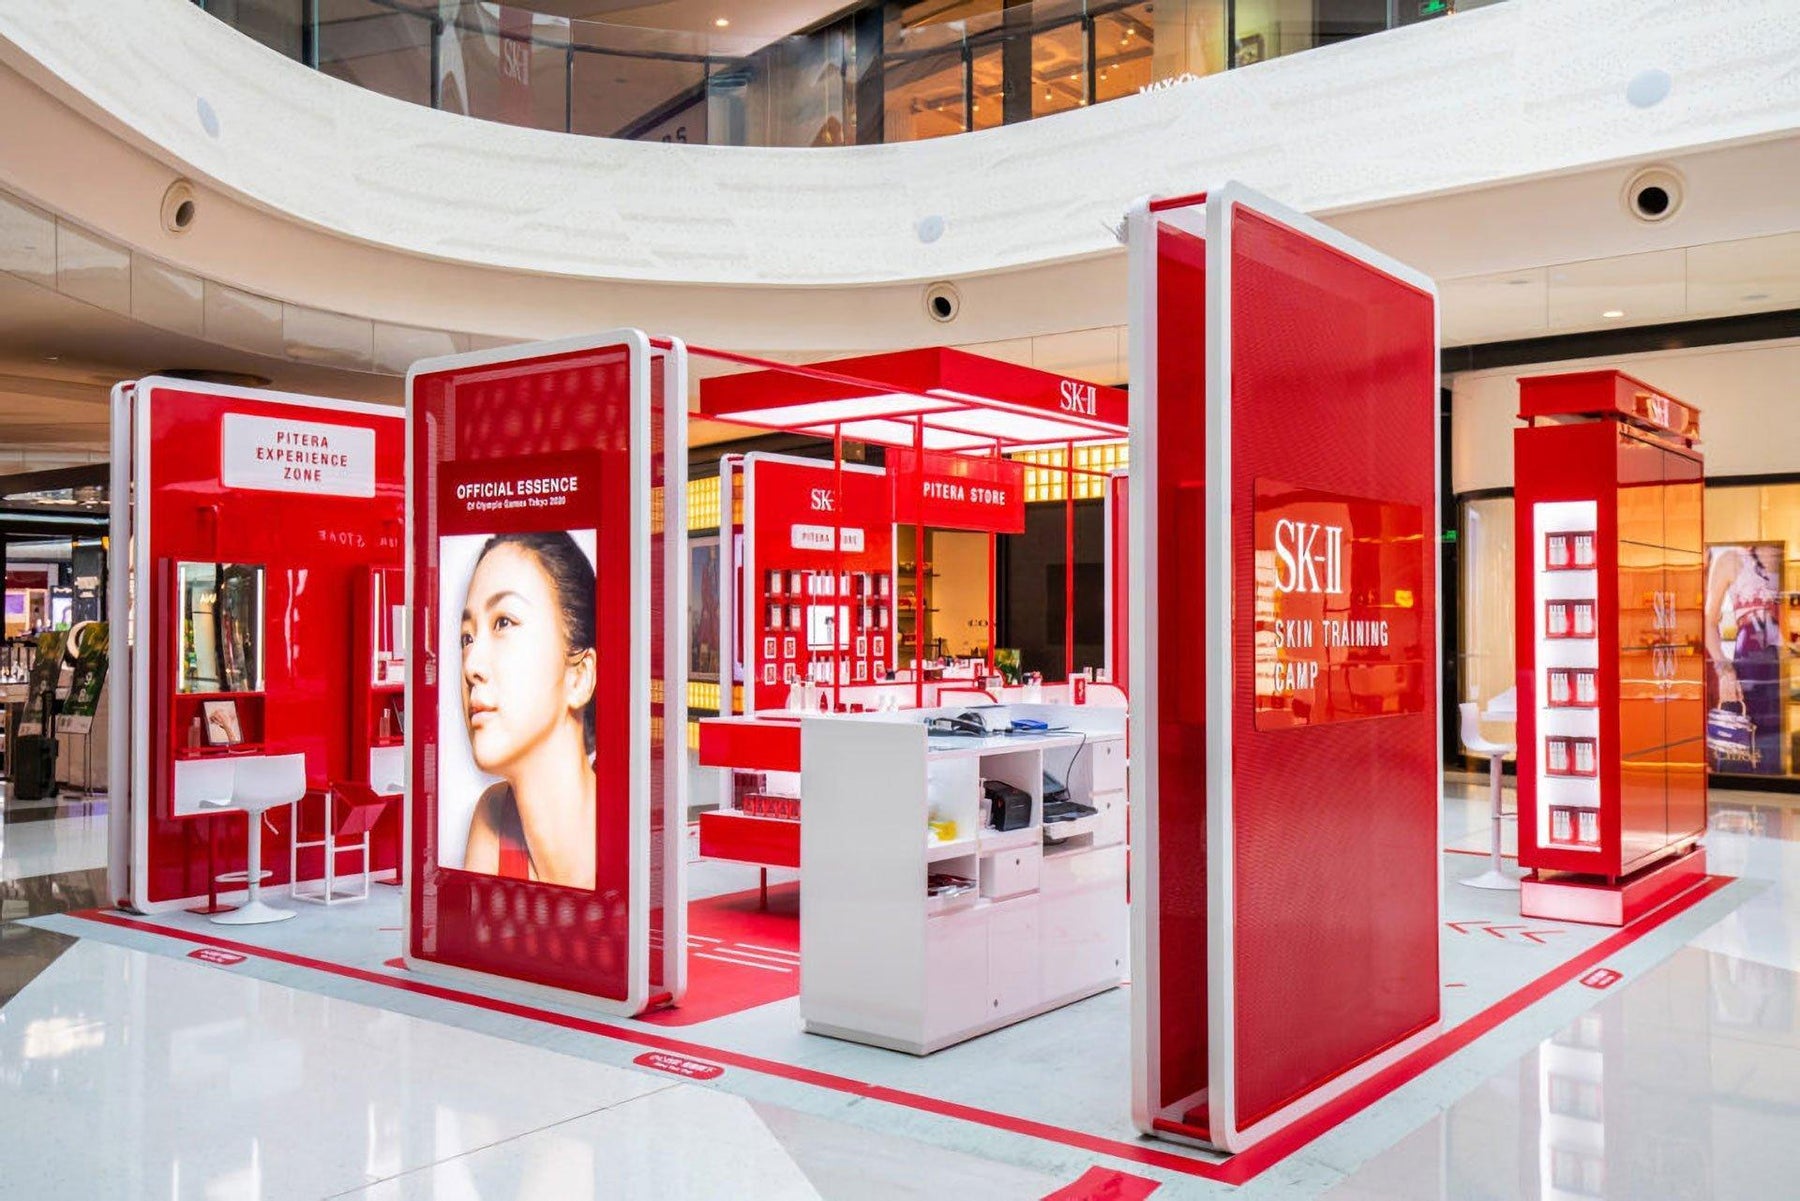 ‘React, respond and re-emerge’ – SK-II wows with ‘Skin Training Camp’ animation in Hainan - M2 Retail